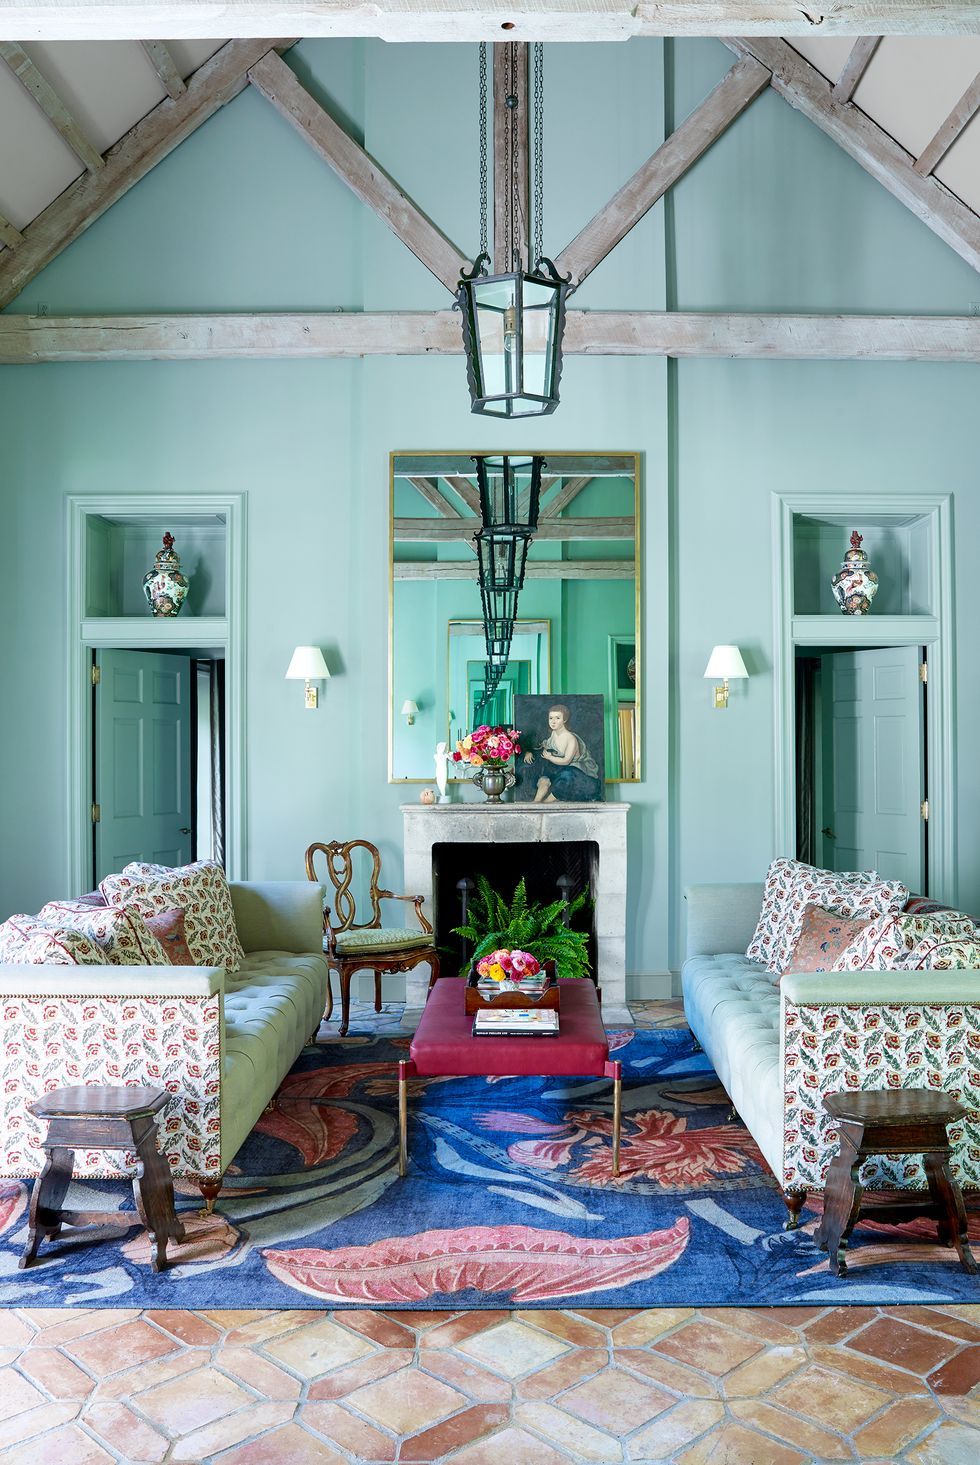 How to choose a color scheme for the rooms of your home